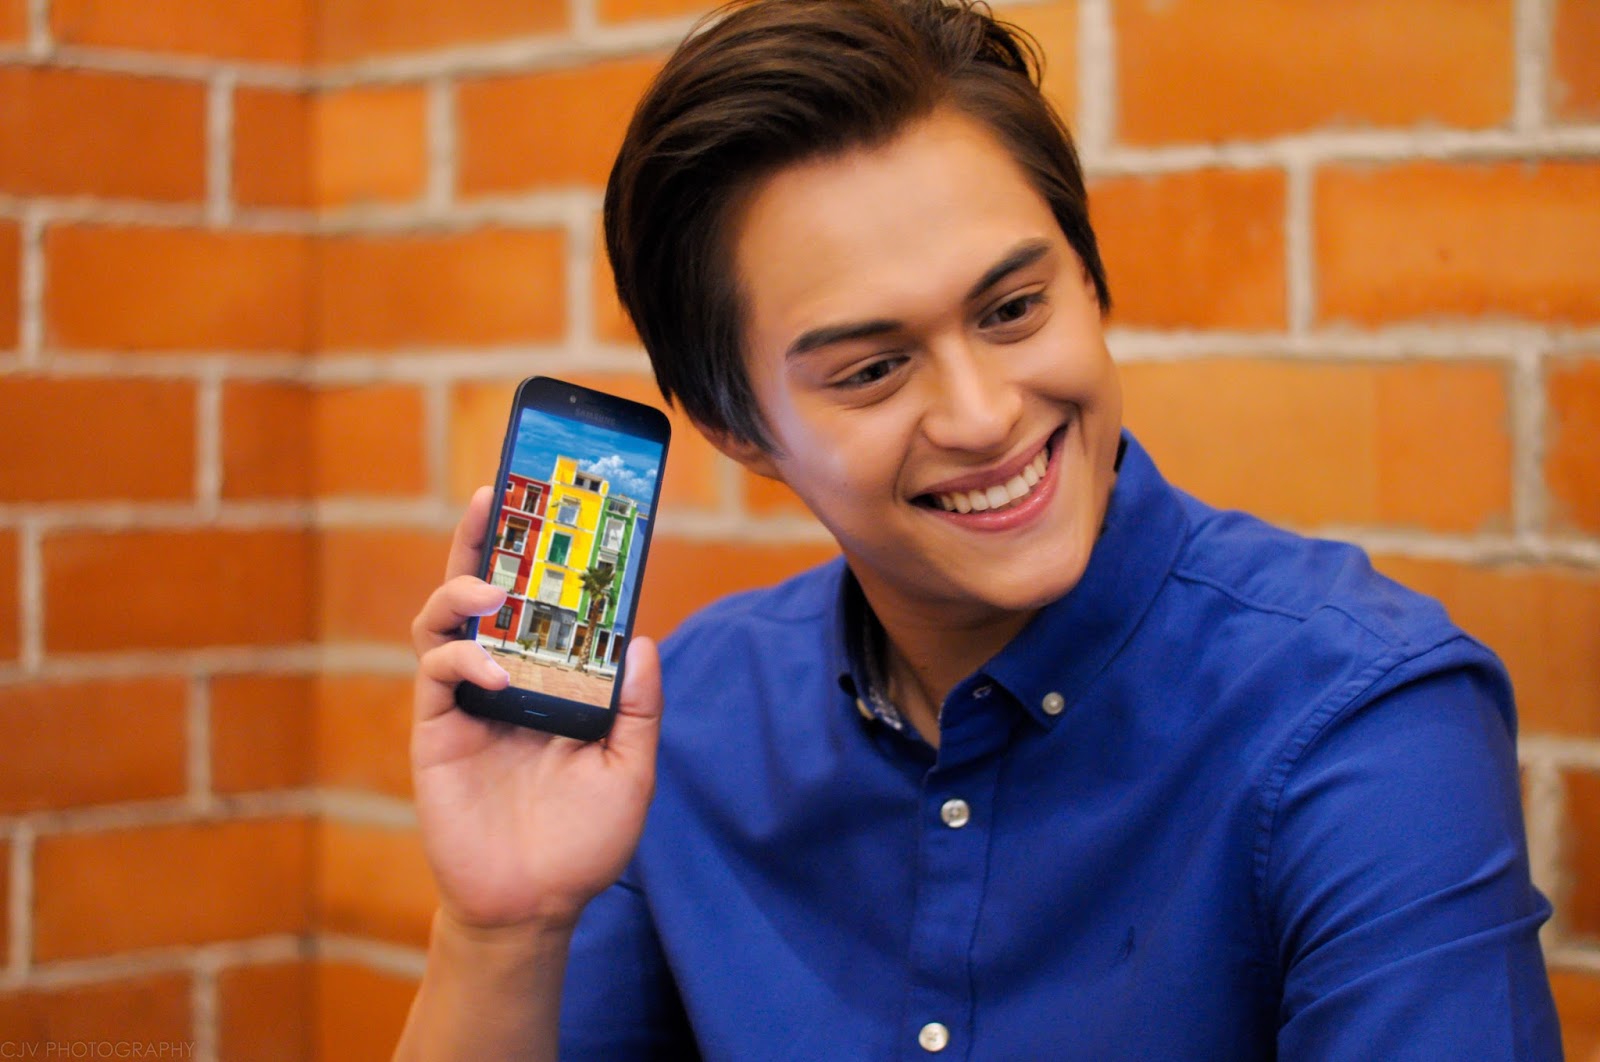 Enrique Gil proudly showing off his Samsung Galaxy J2 Pro.